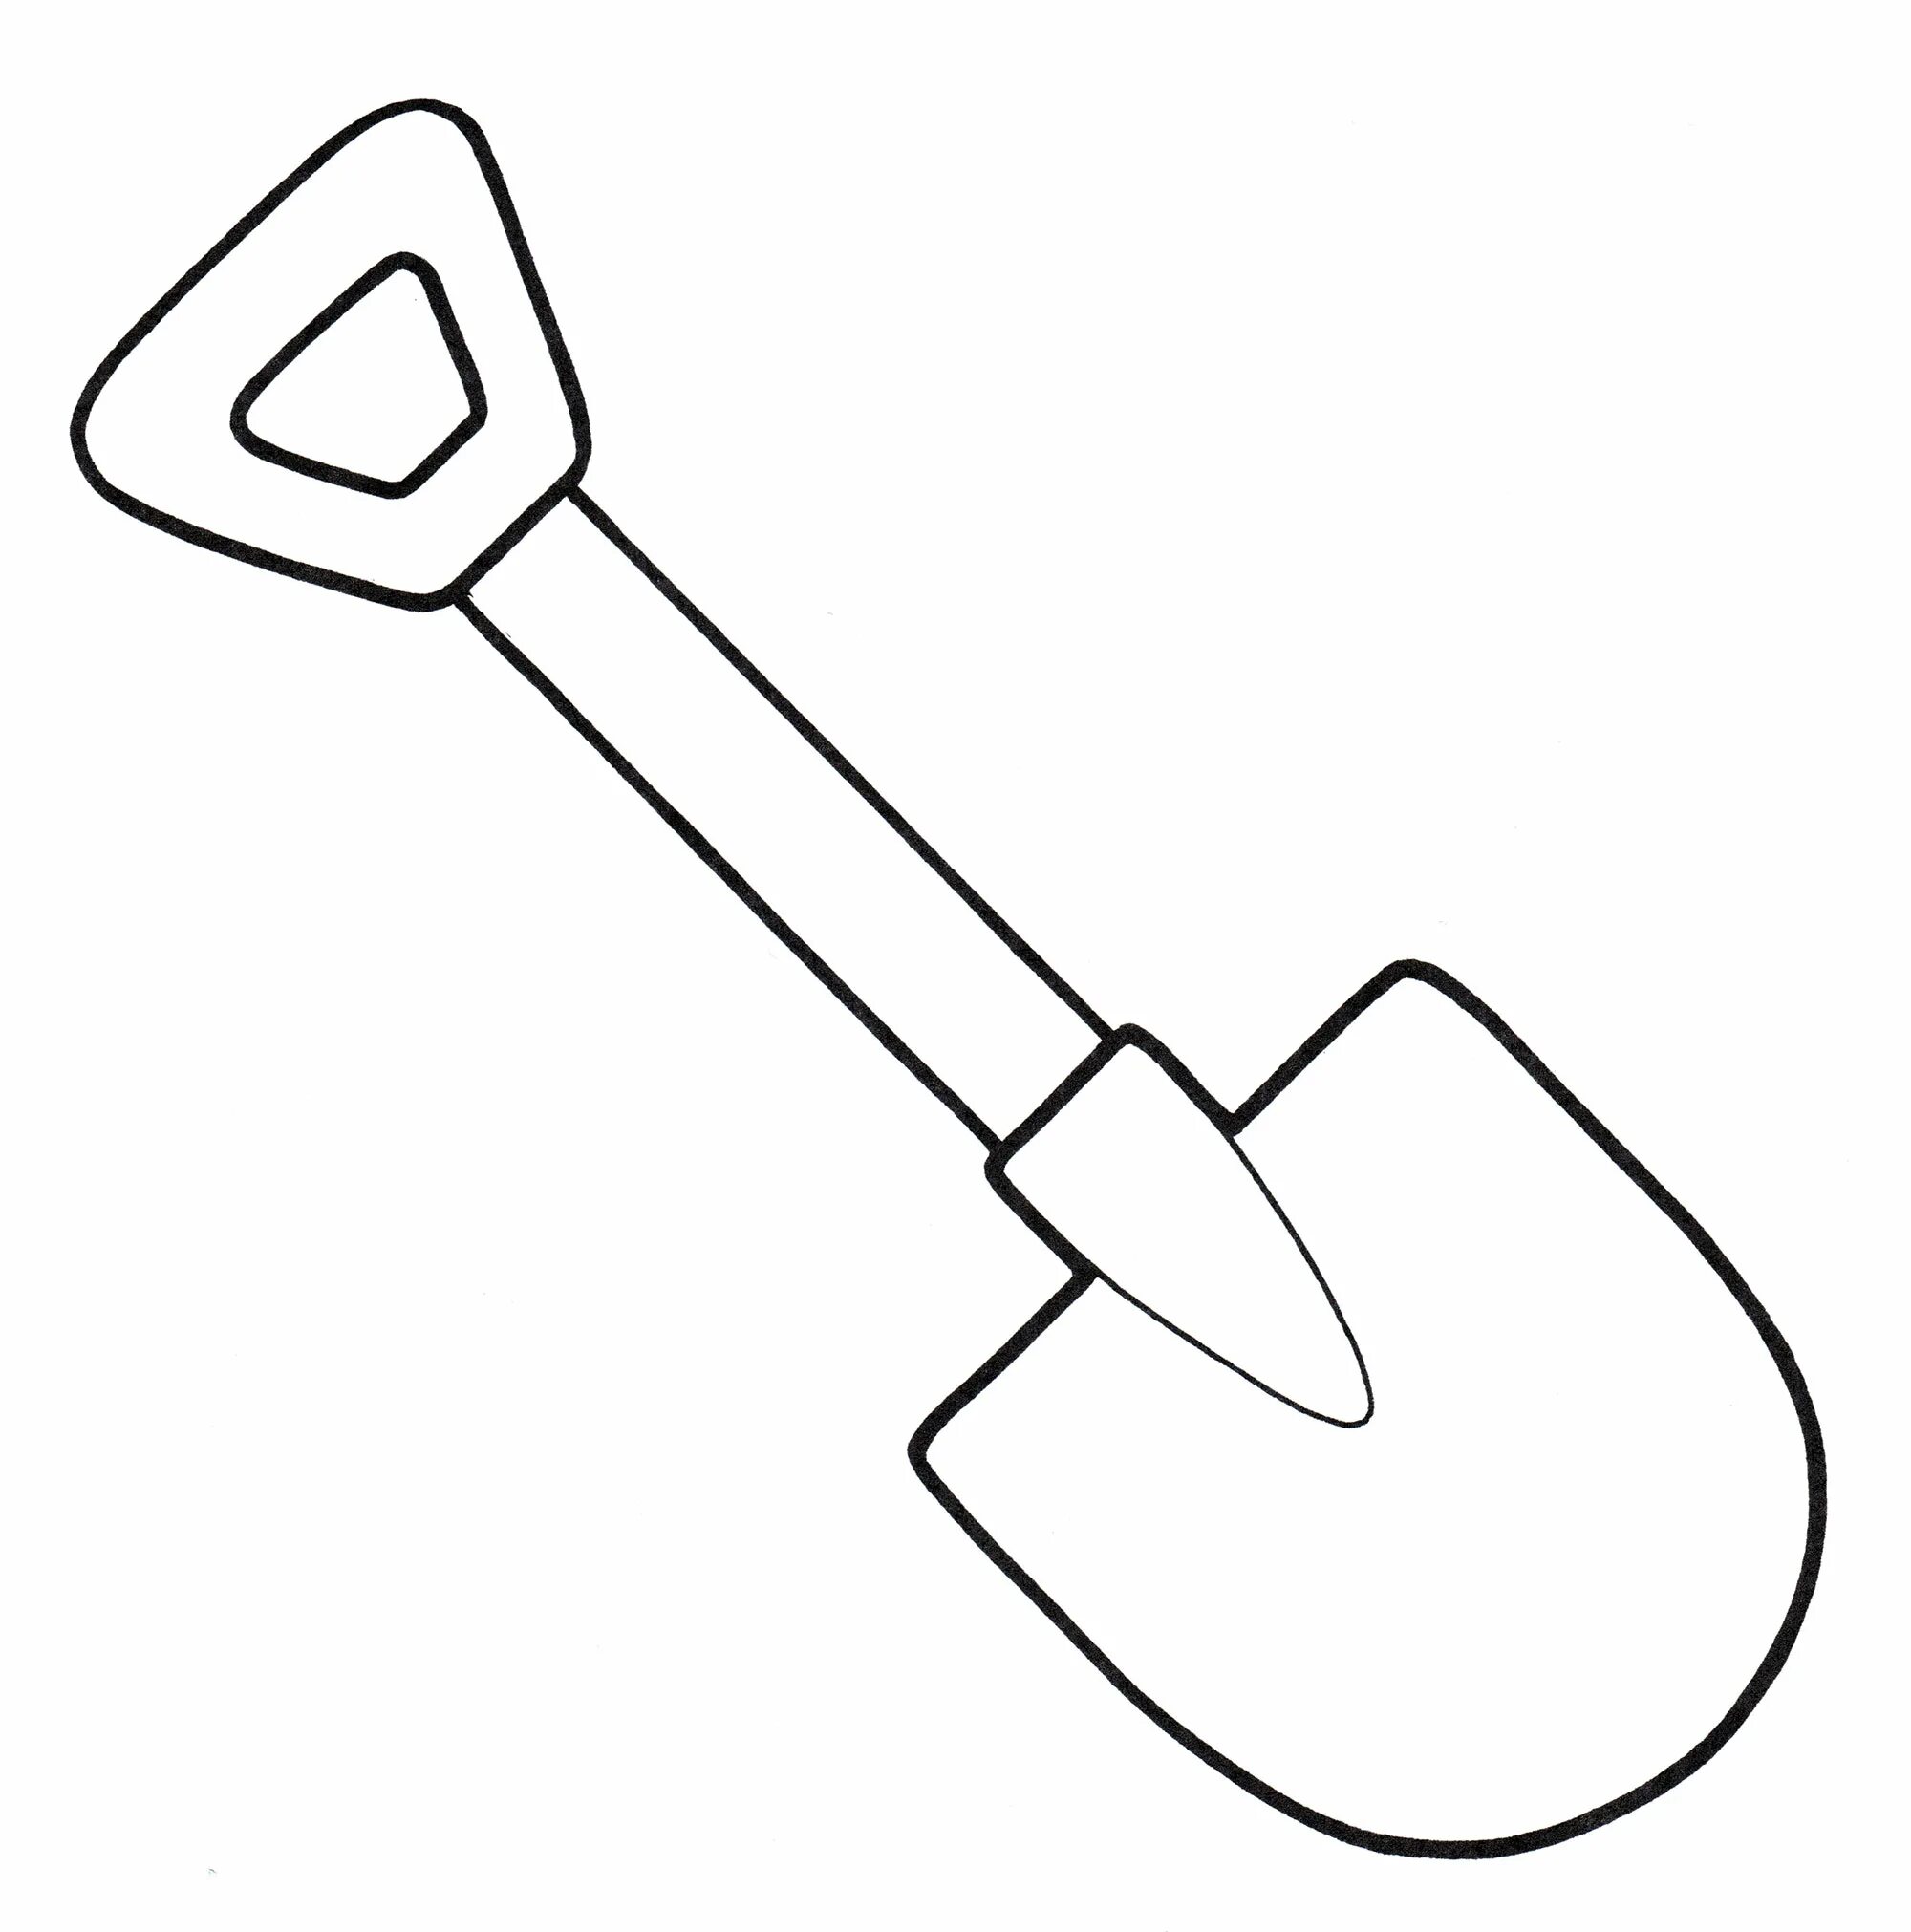 Adorable spade coloring page for kids